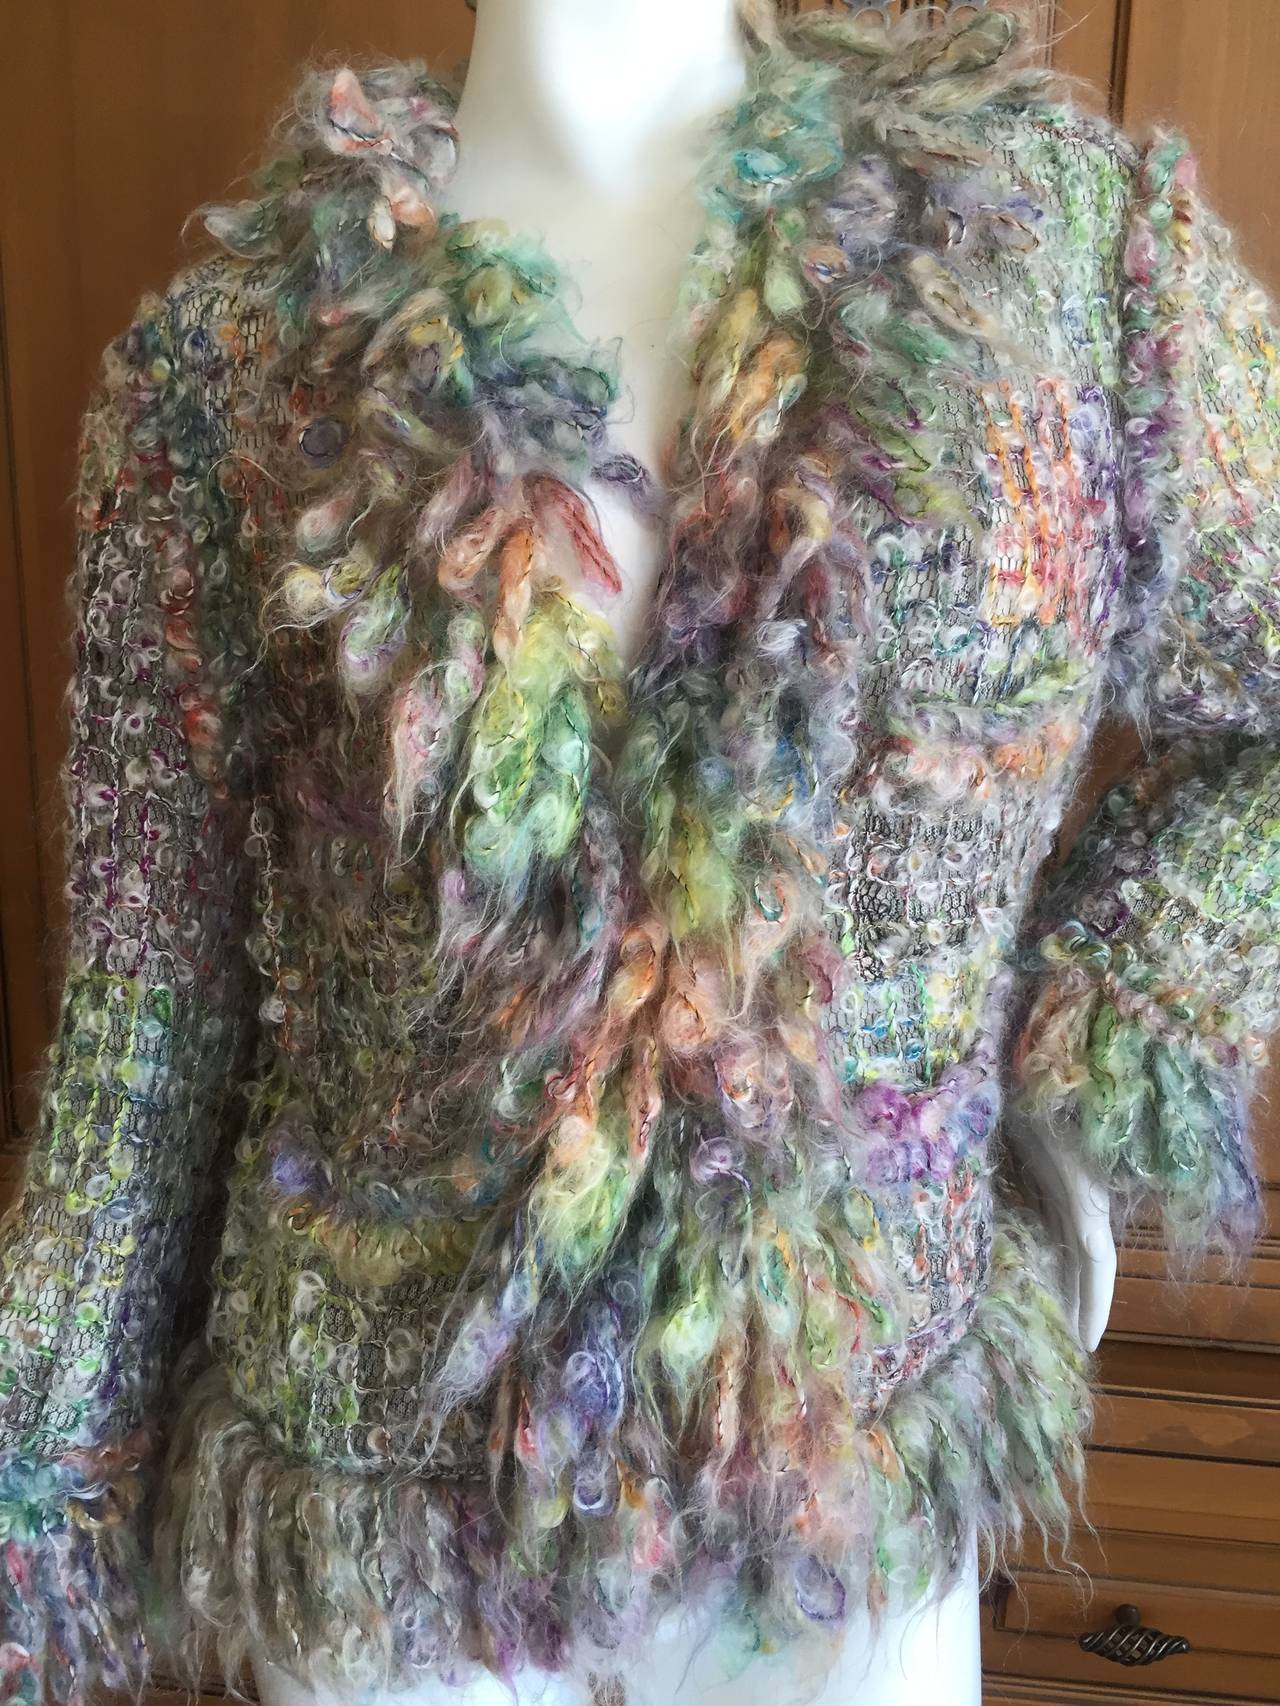 Chanel Delightful Multicolor Fantasy Woven Jacket with Wooly Trim.
This is so chic, it is a trompe-l'œil of tweed.
Very loosely woven colorful wool (?) on a sheer cotton net shell.
With a wonderfully wooly fringe,
This is much prettier in